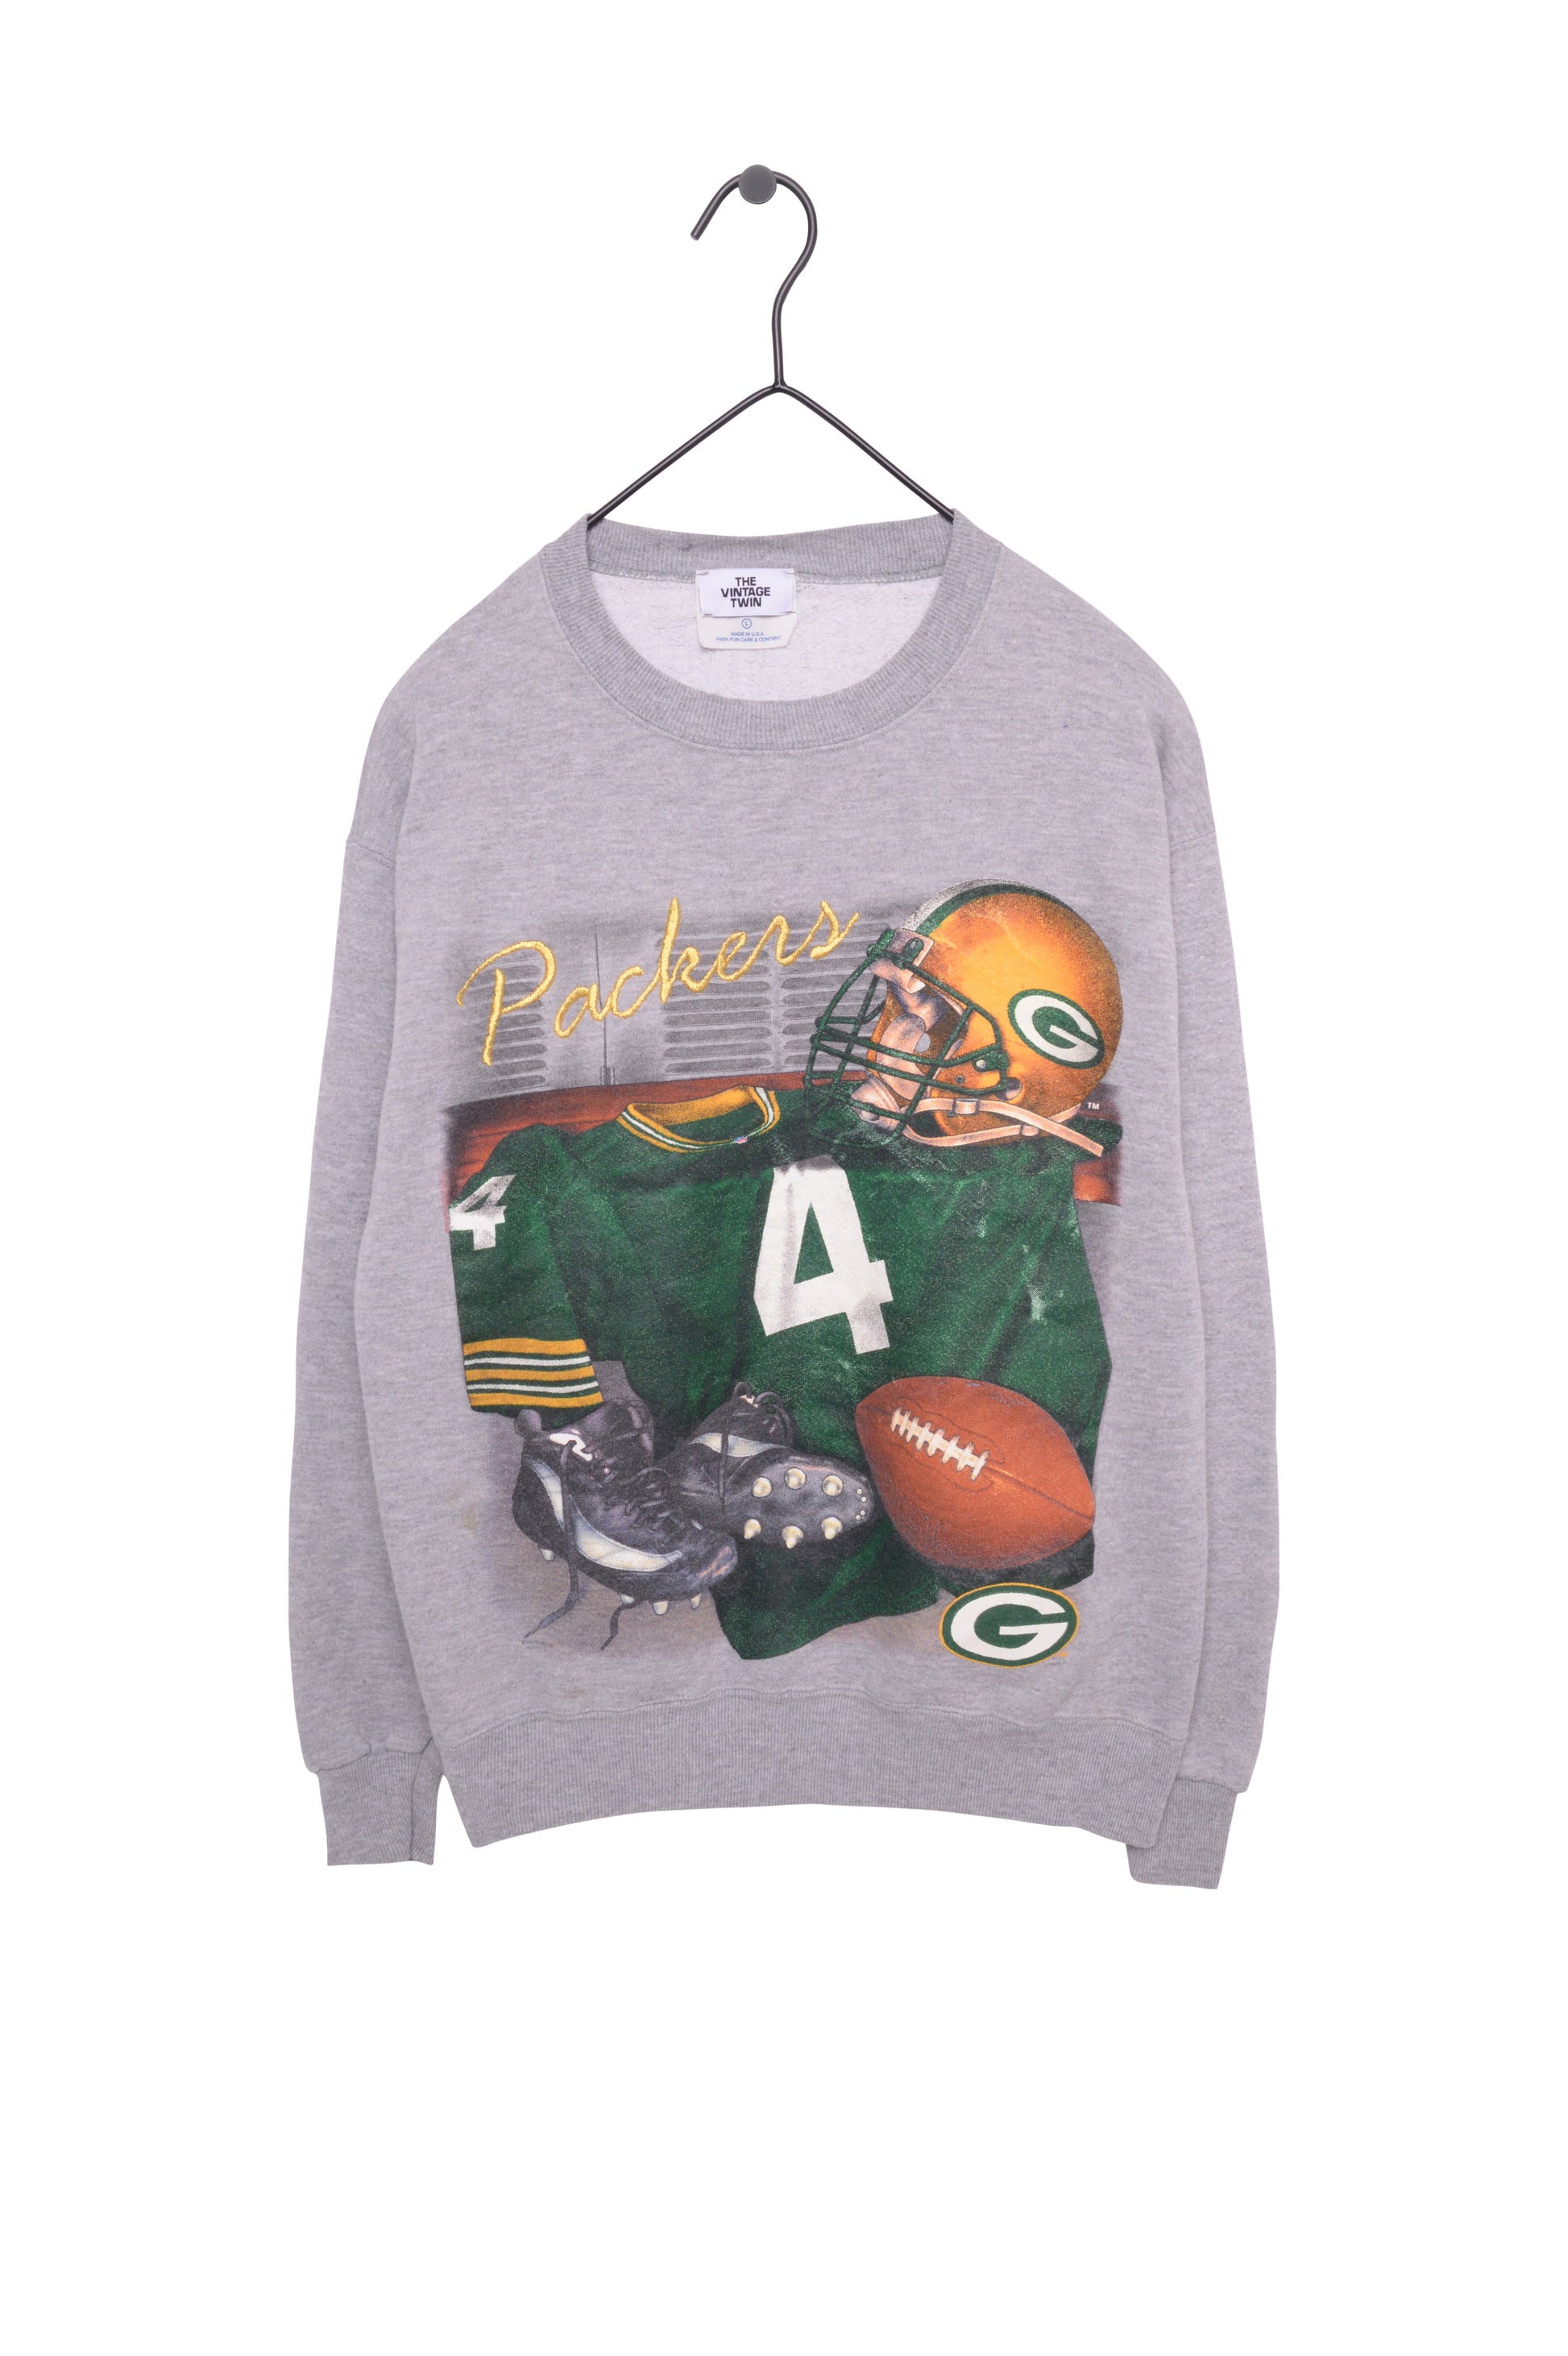 Green Bay Packers Sweatshirt USA Free Shipping - The Vintage Twin